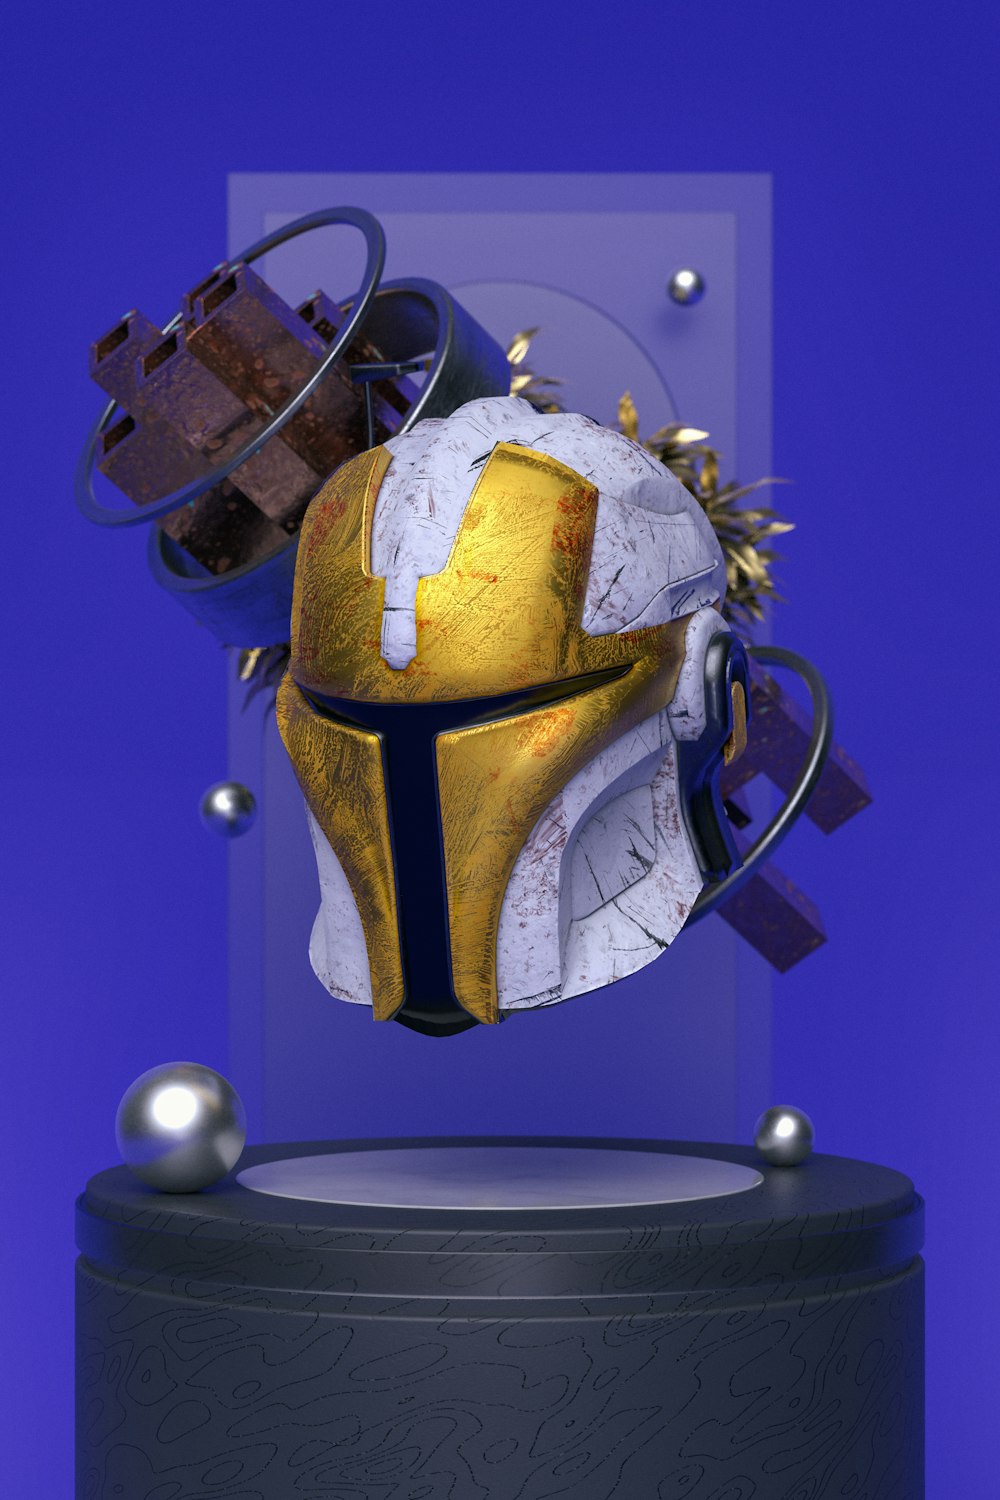 a helmet with a gold and black design on it